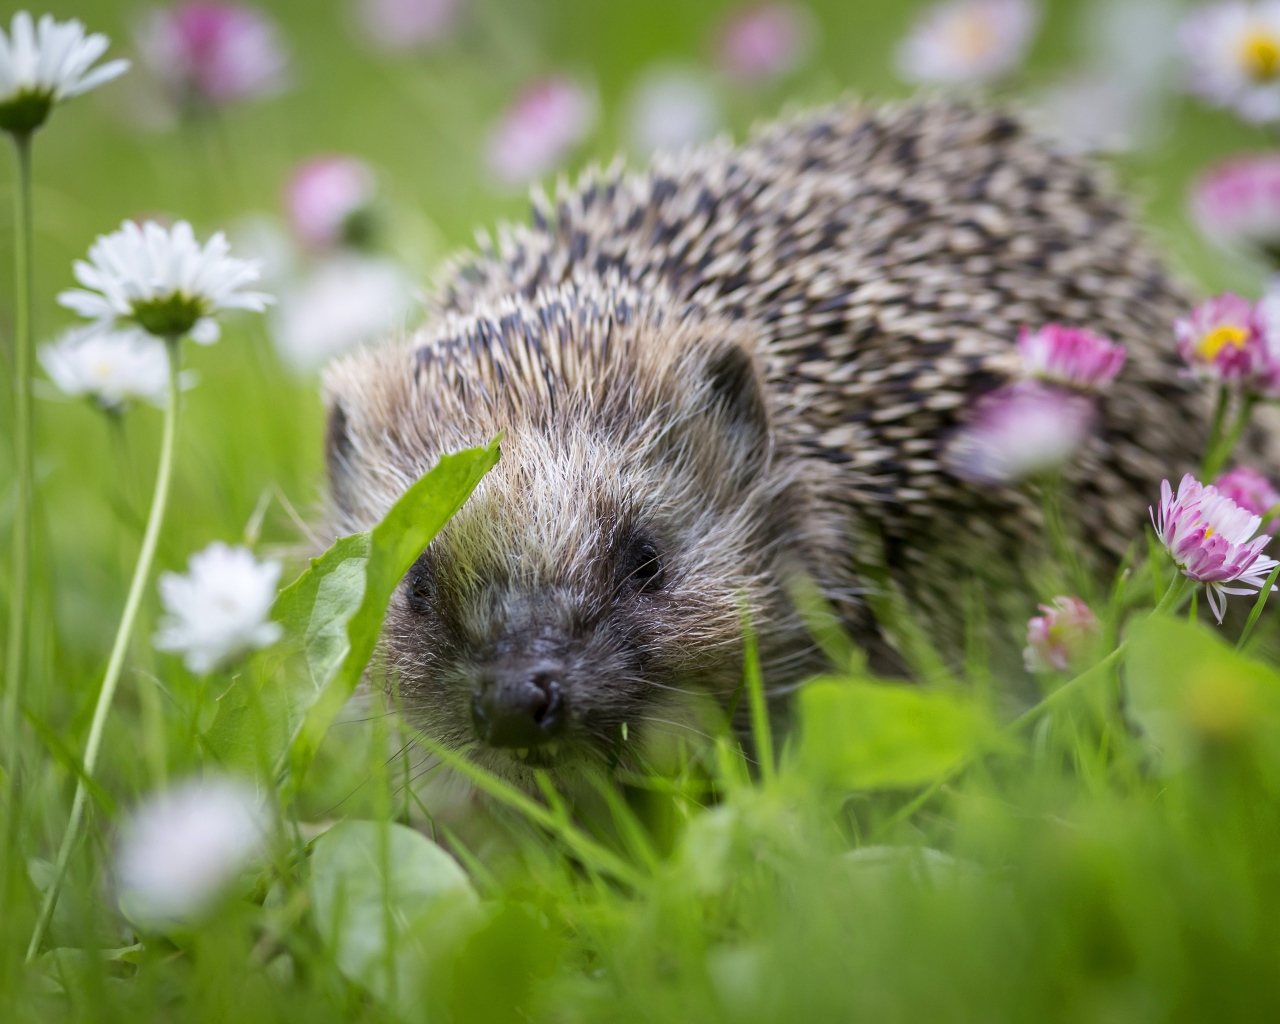 Little hedgehog in green grass with white and pink daisies